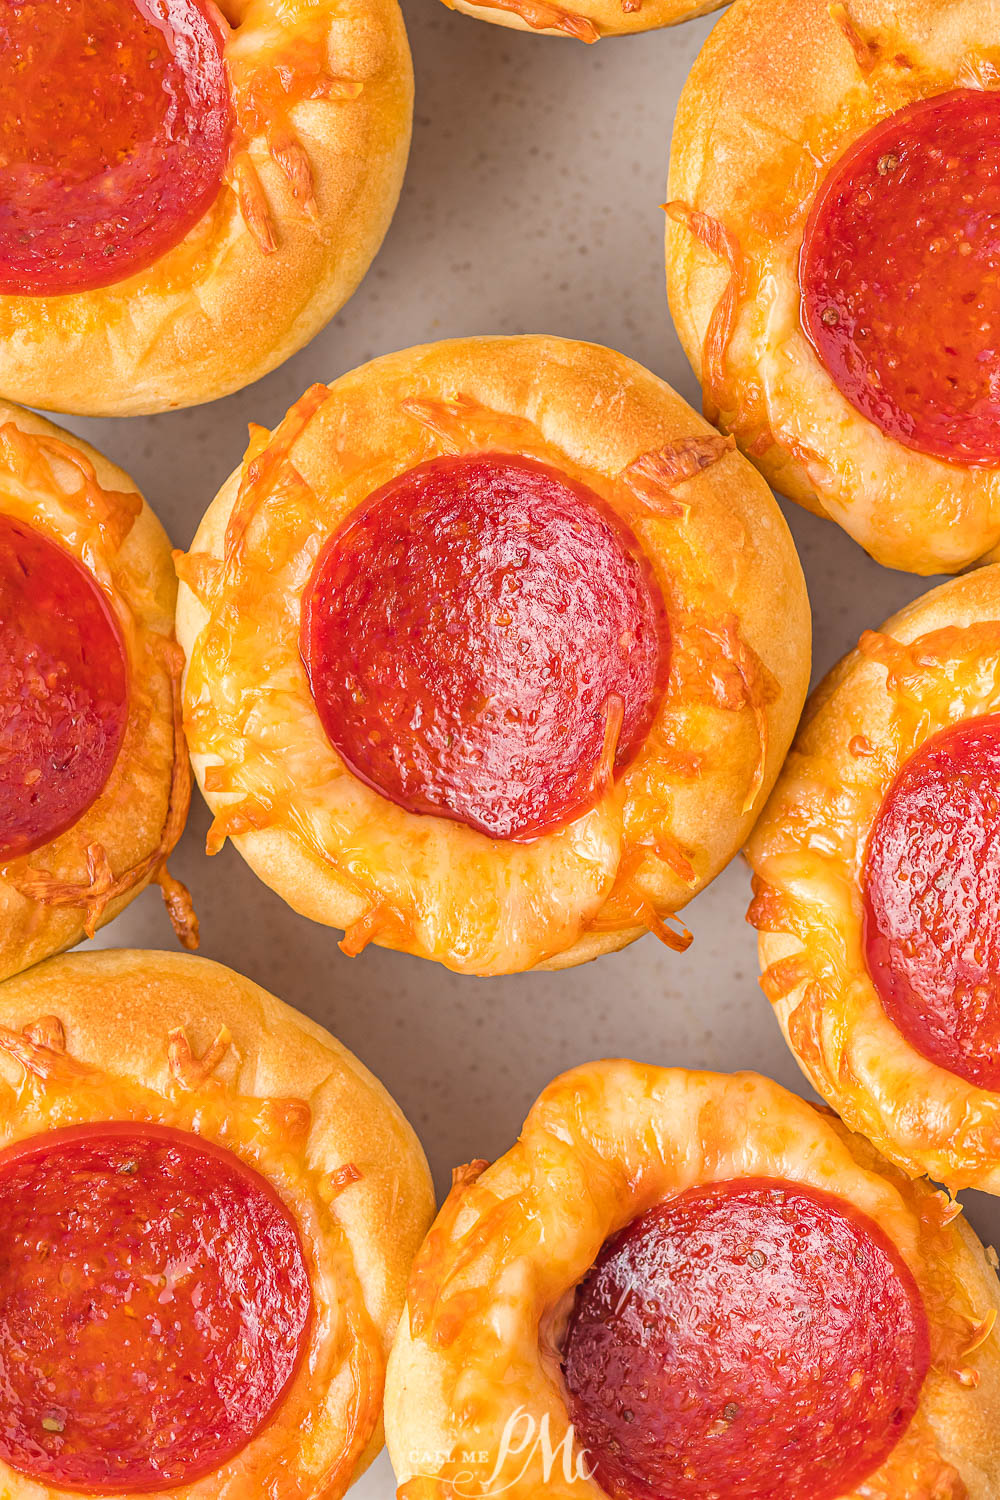 A muffin pan filled with pepperoni pizza bites is displayed on a table.